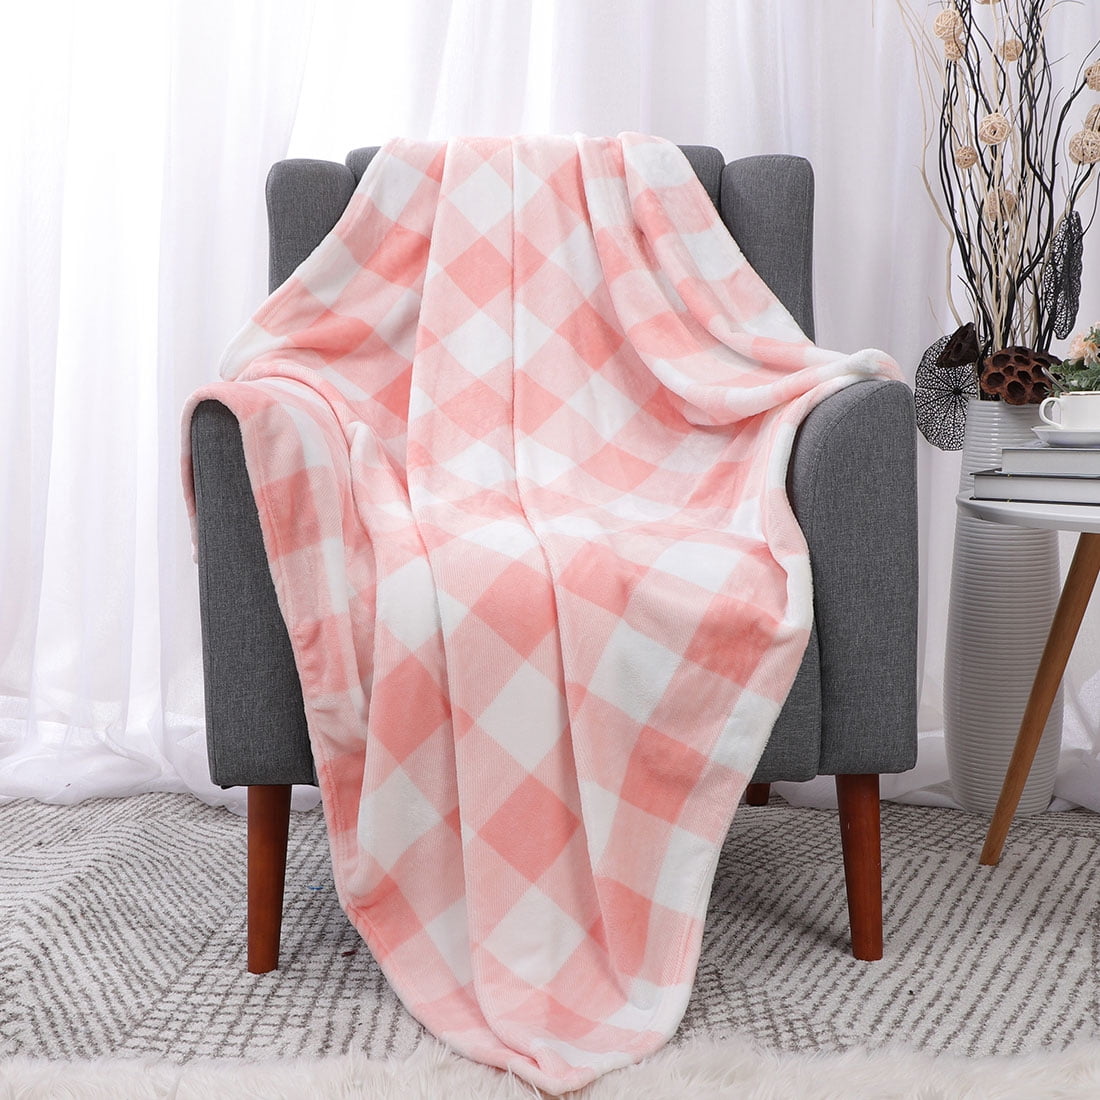 Light Pink Soft Woven with Decorative Fringe 50 x 60 in. Farmhouse Throw with Check Pattern Sofa Buffalo Plaid Throw Blanket for Couch Office Chair Outdoor Lightweight for Bed